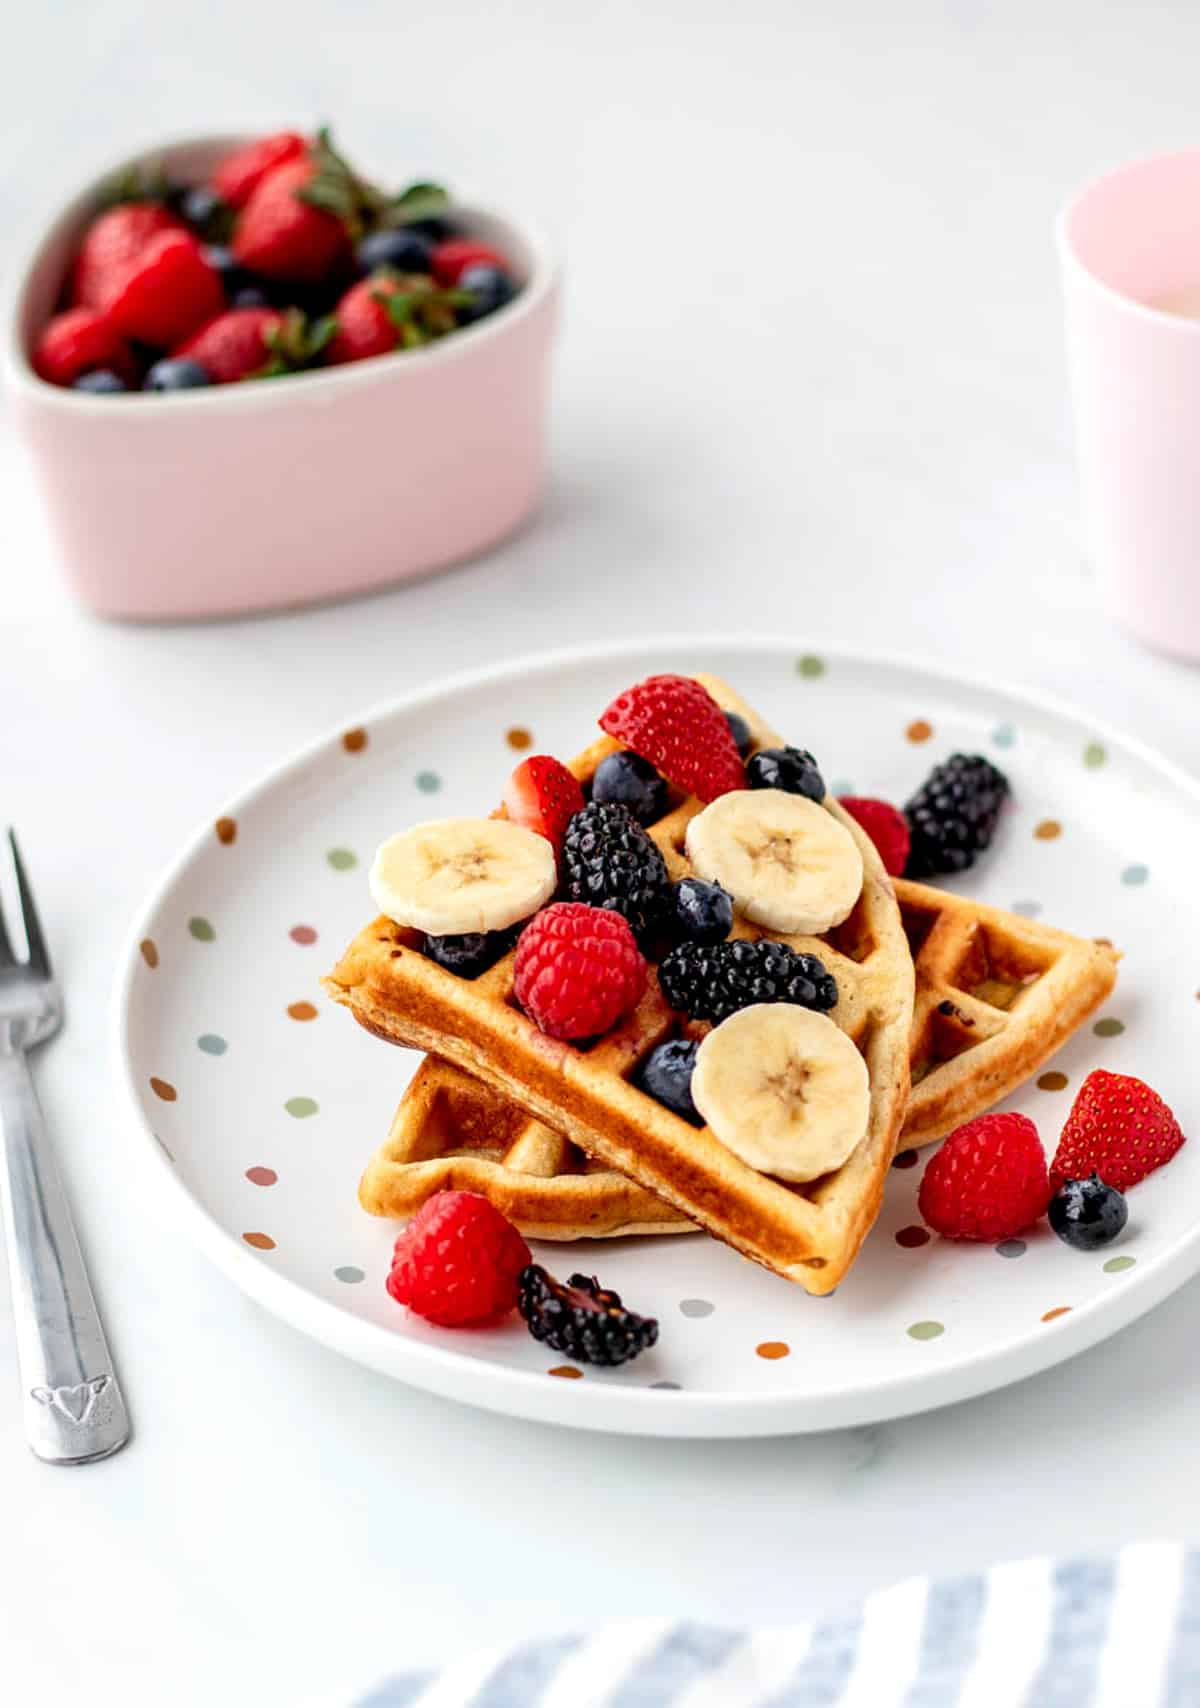 3-ingredient protein waffles on a polka dot plate topped with berries and bananas.